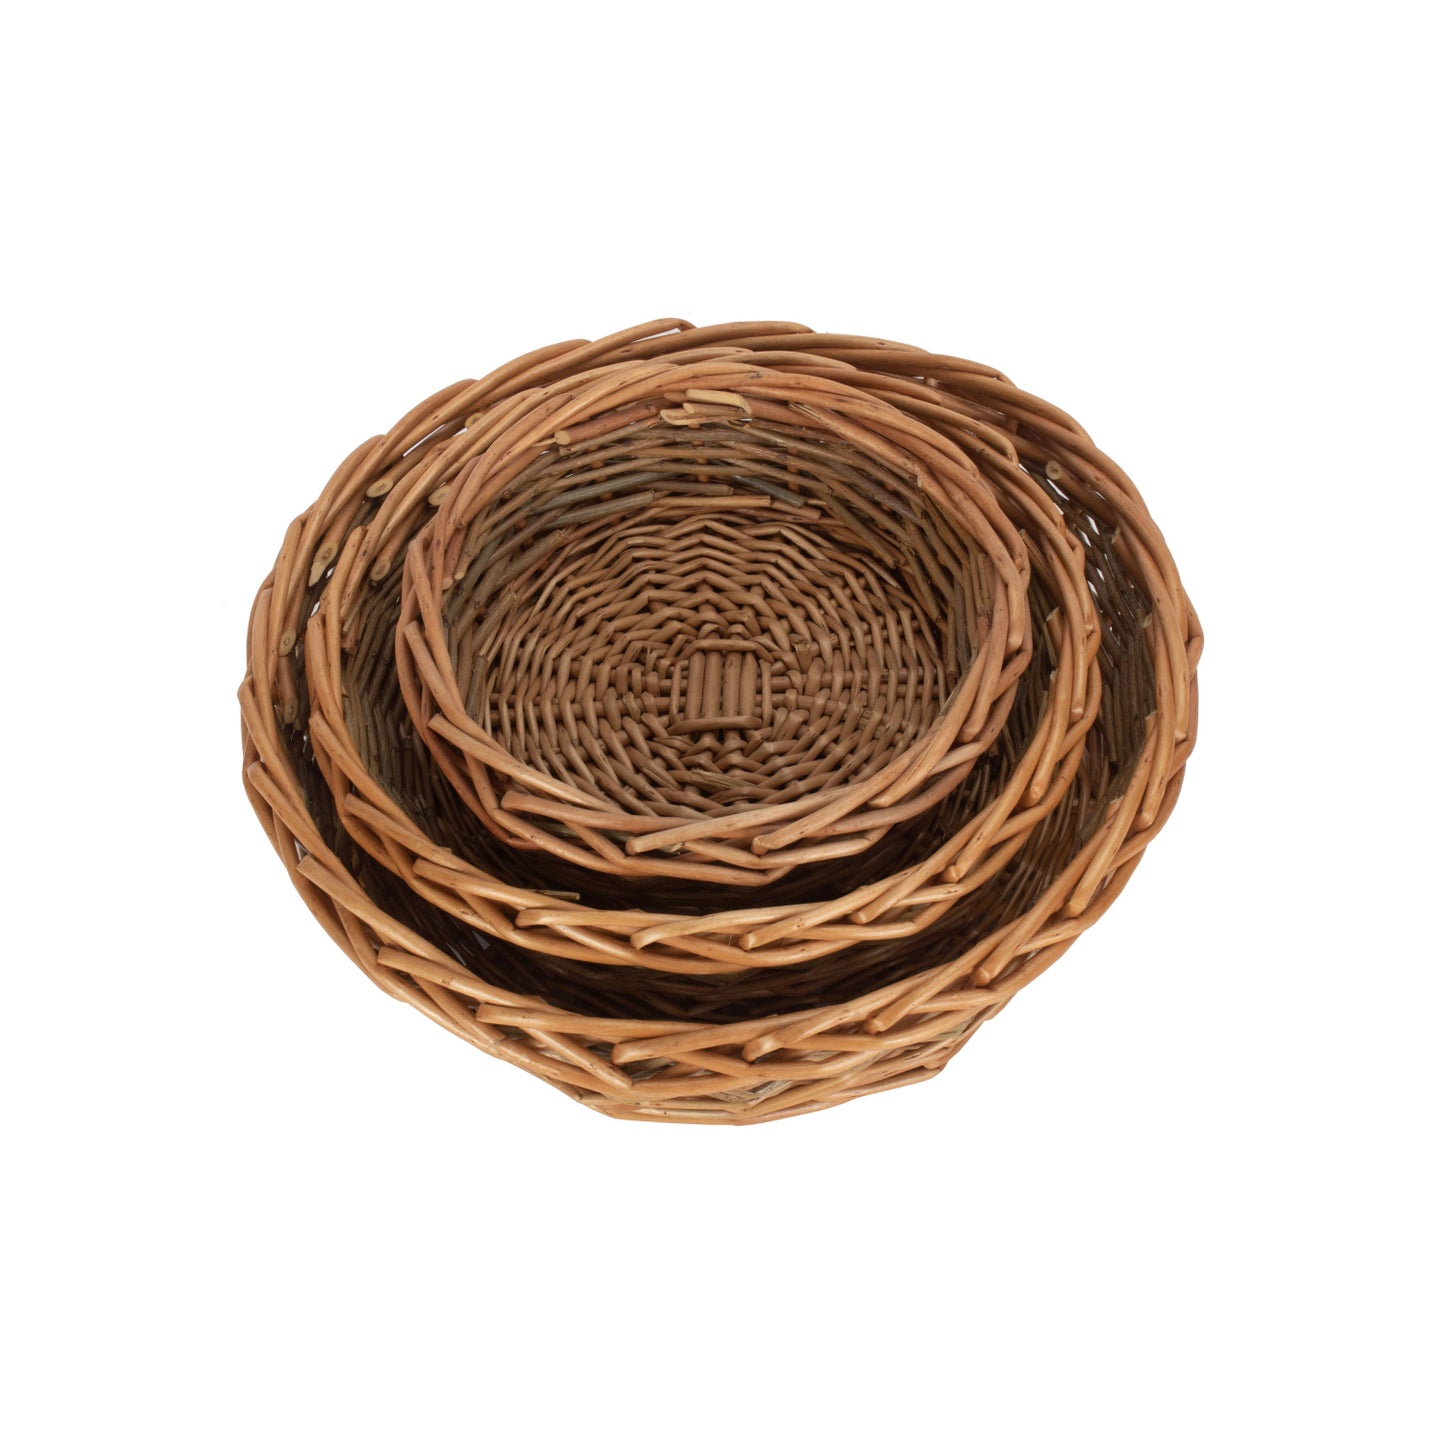 Unpeeled Willow Round Tray Set 3